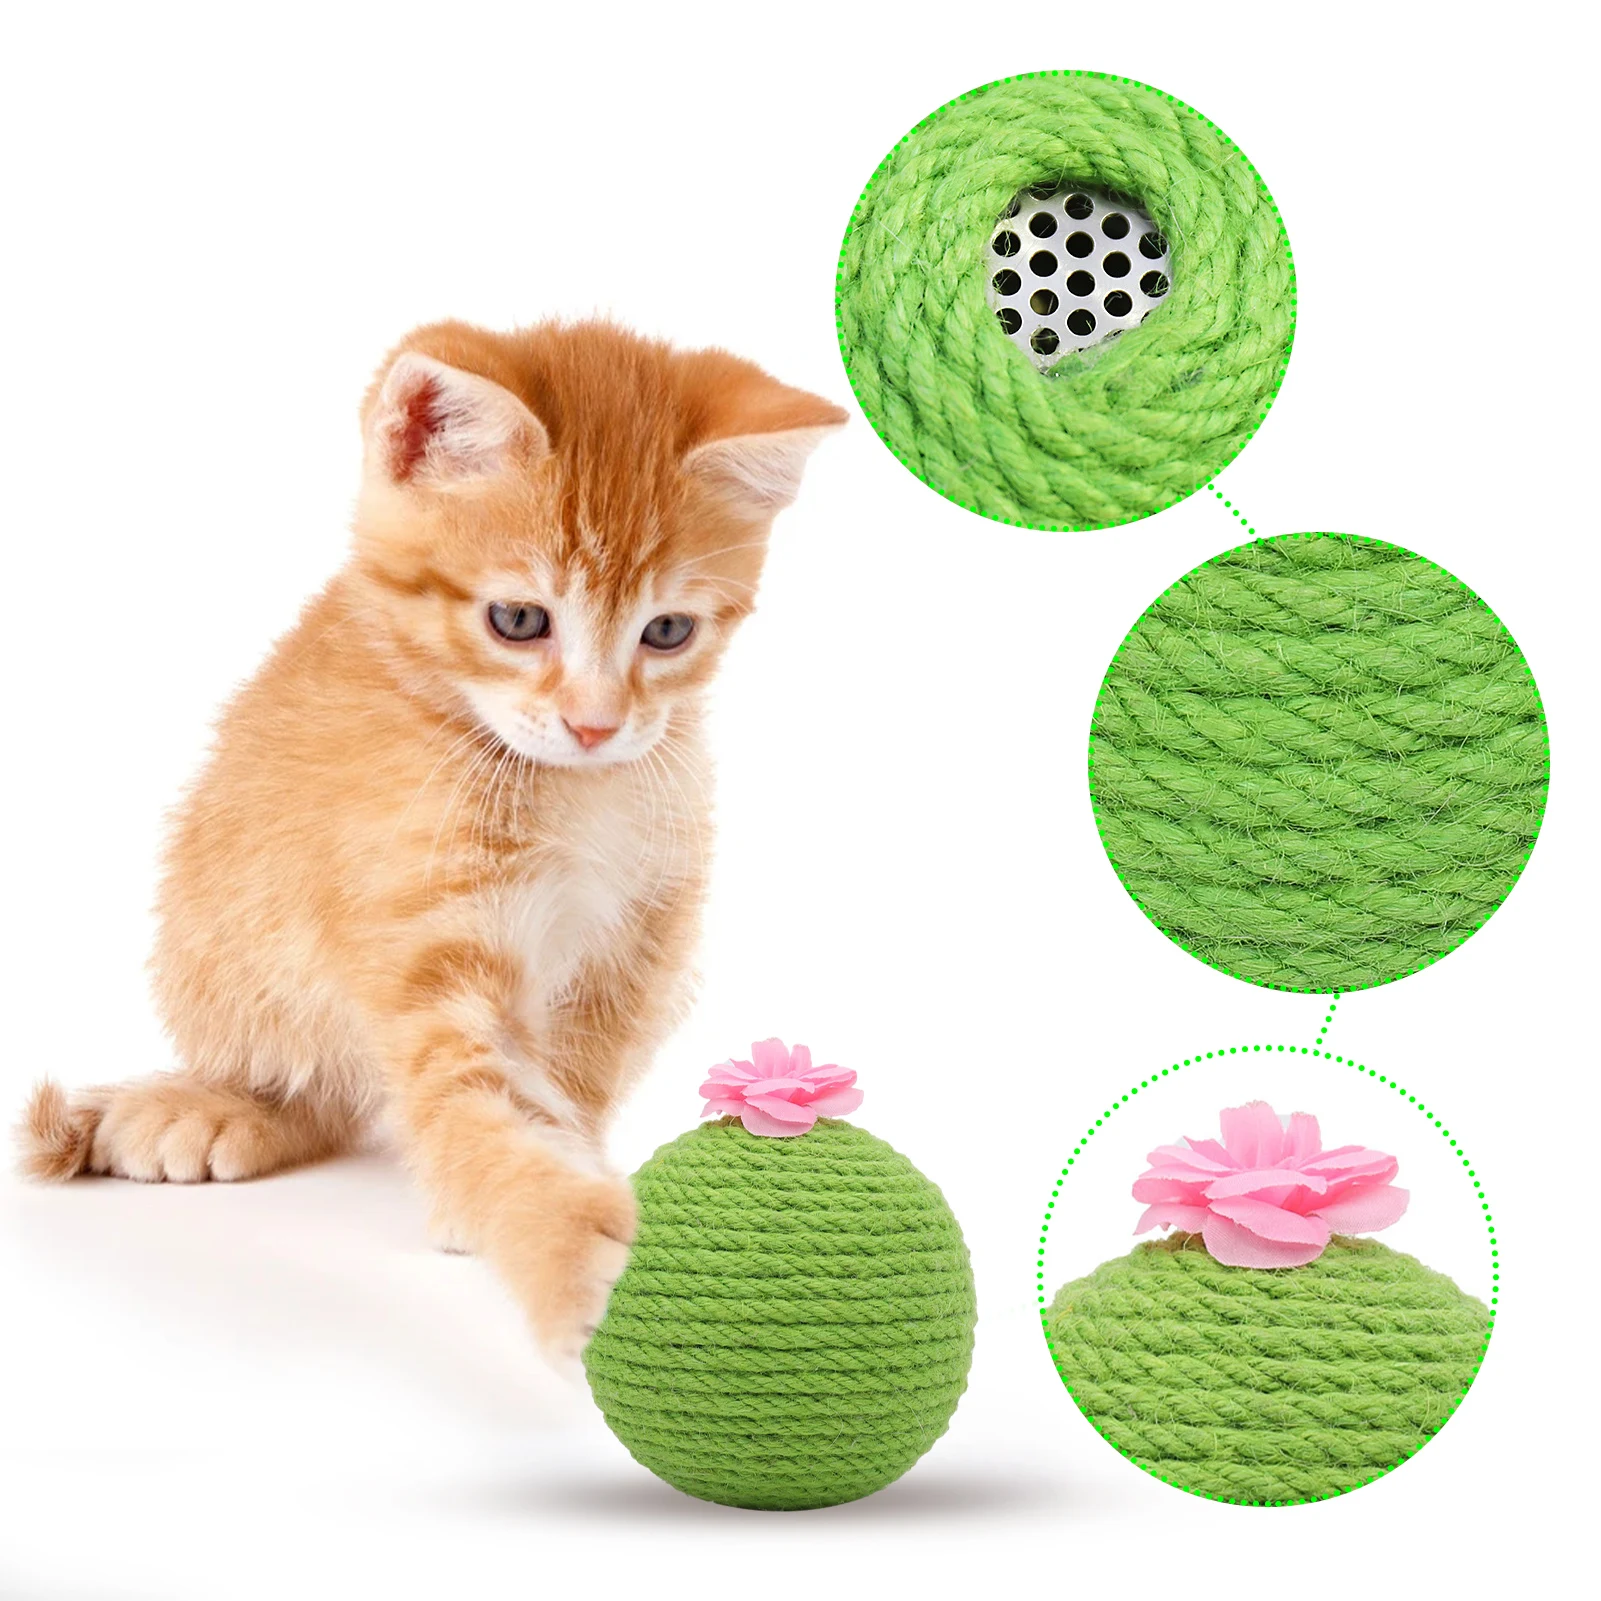 

Cat Toy Sisal Cactus Cat Scratching Ball Wood Track with Rolling Ball Kitten Claw Grinding Wear-Resistant Sisal Rope Pet Scratch